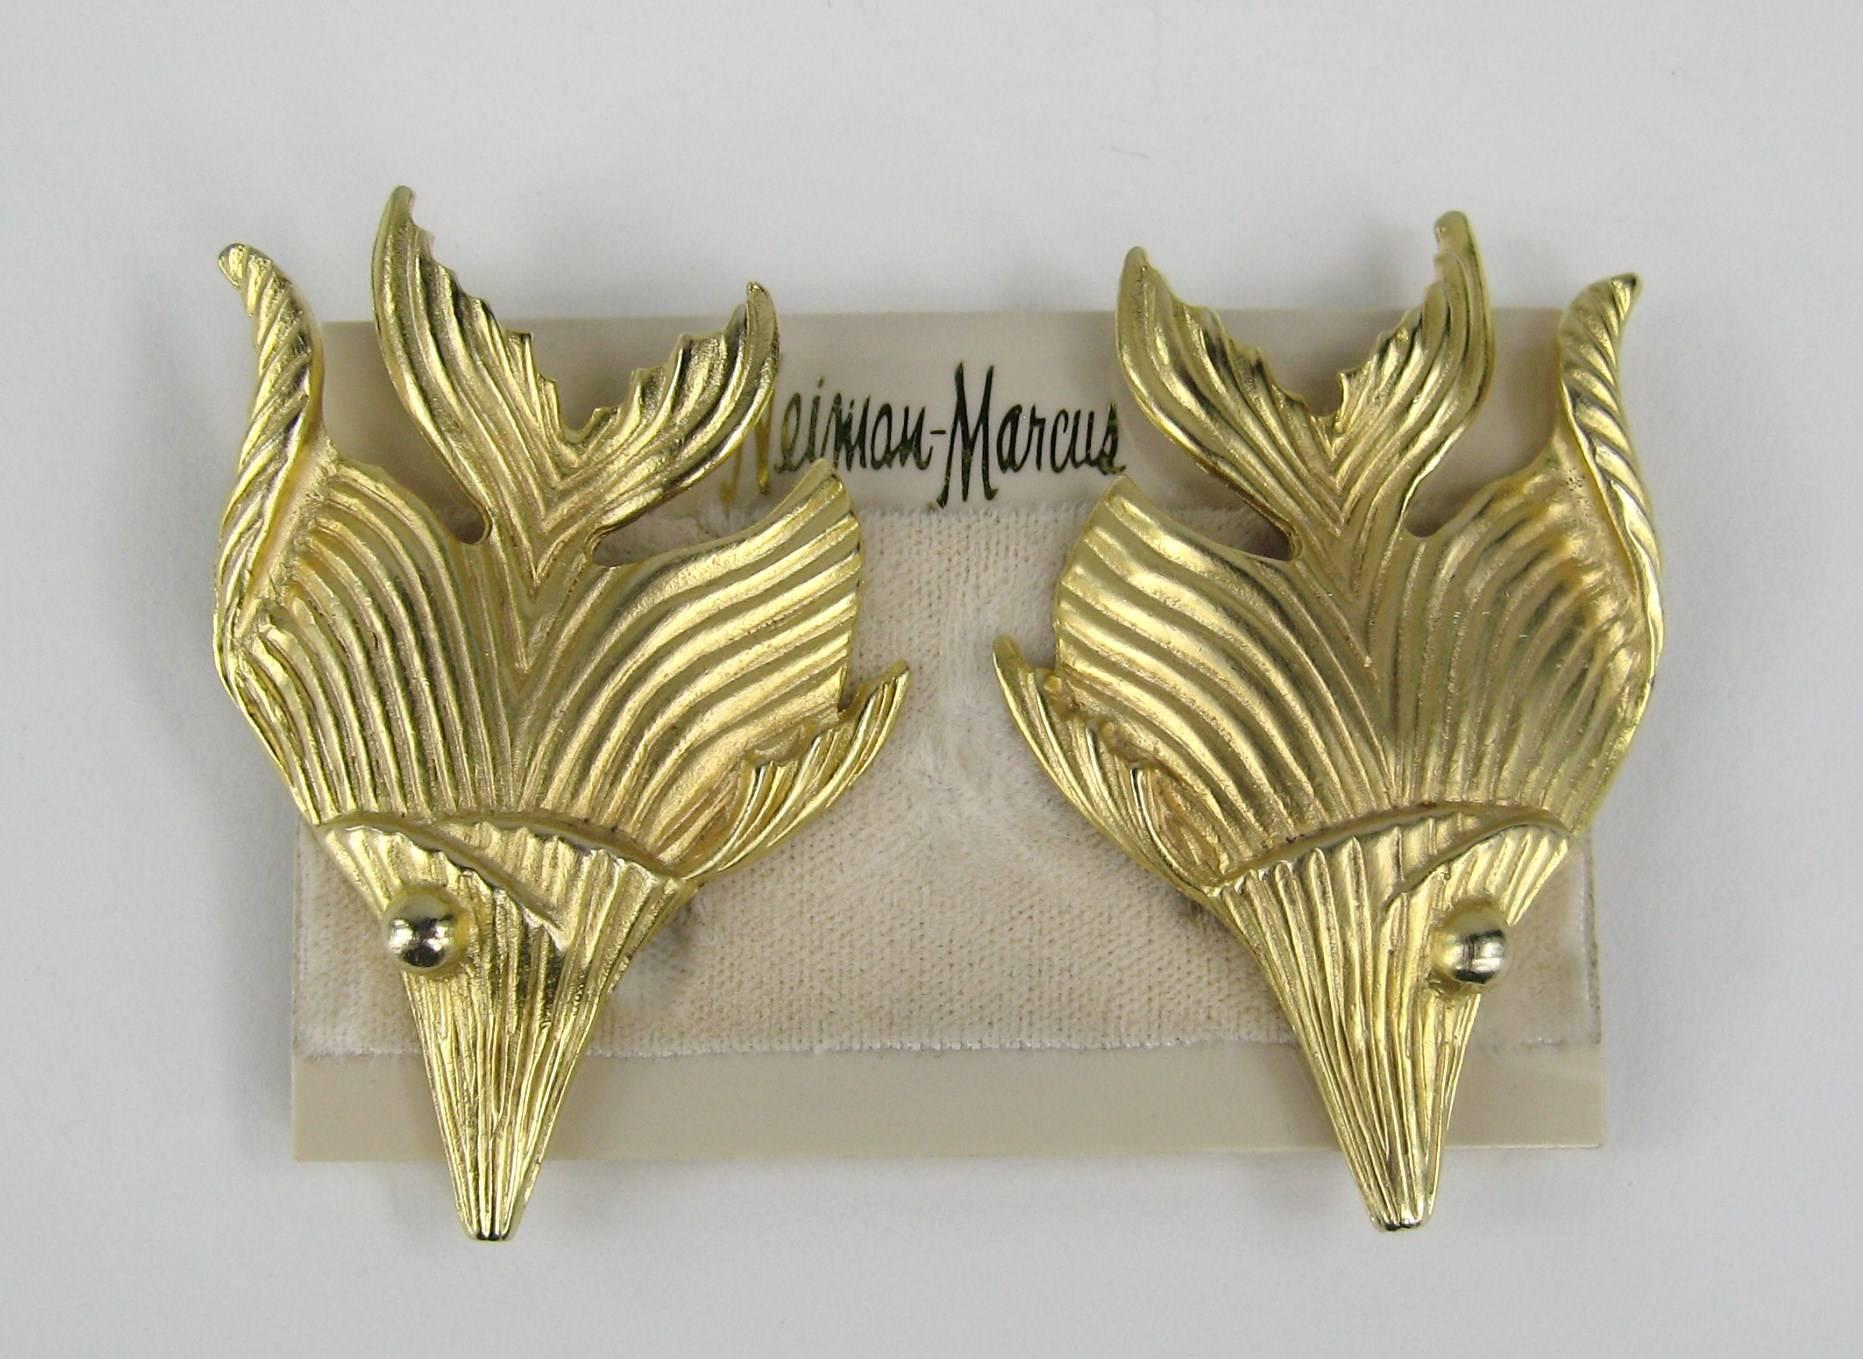 Vintage 80's R.J. GRAZIANO Gold Tone Textured Fish Earrings Clip on's ANGELFISH.  Still on the Neiman Marcus Earring Card. Measuring 2-1/2